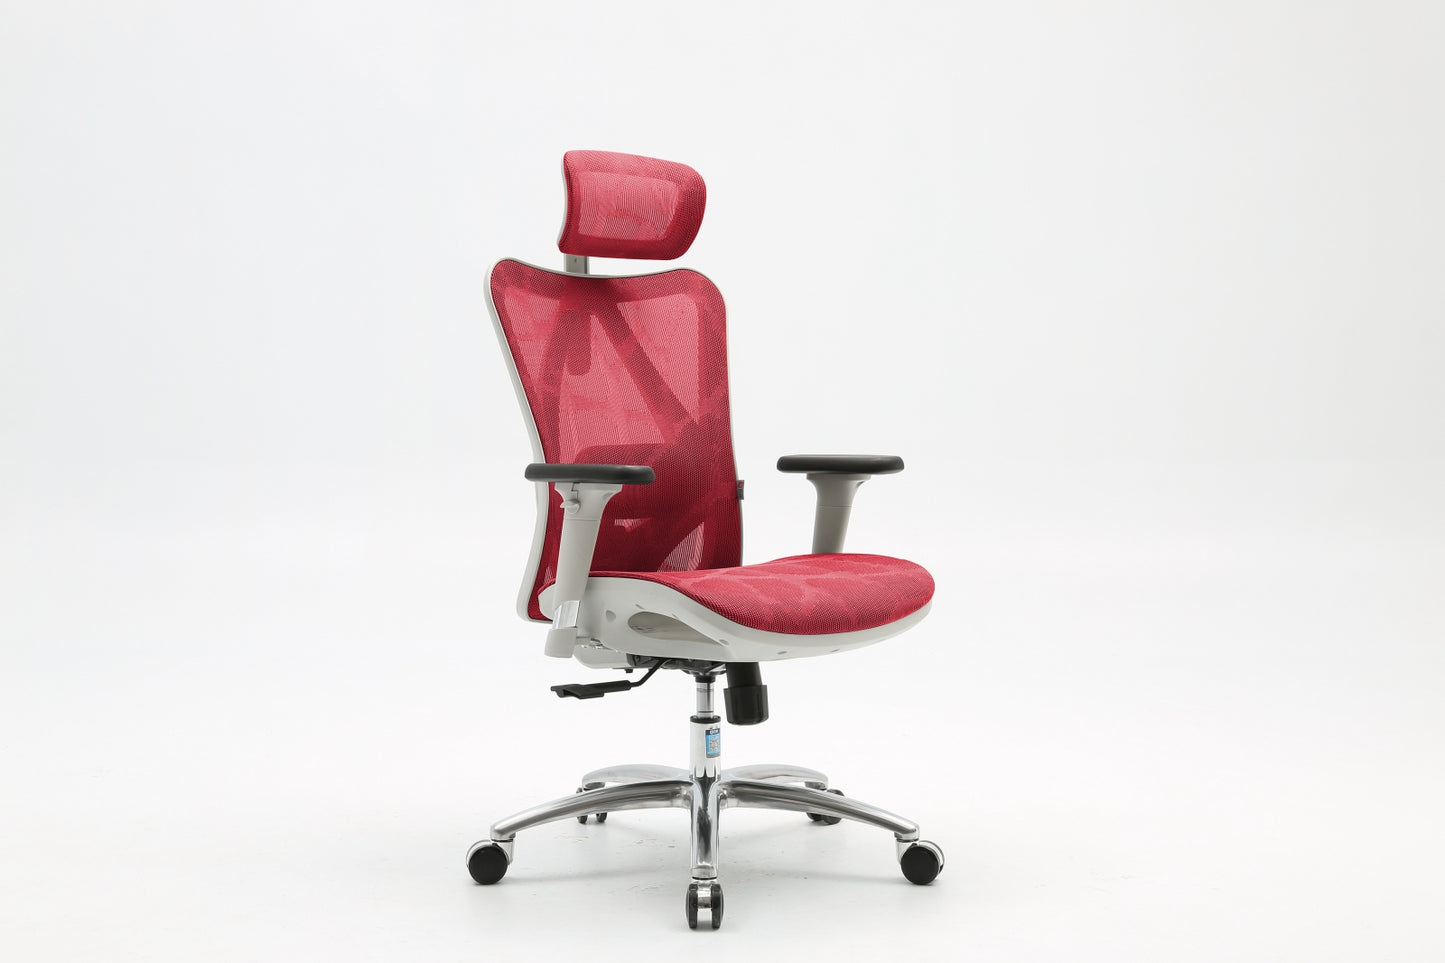 Sihoo M57 Limited Edition (without footrest)